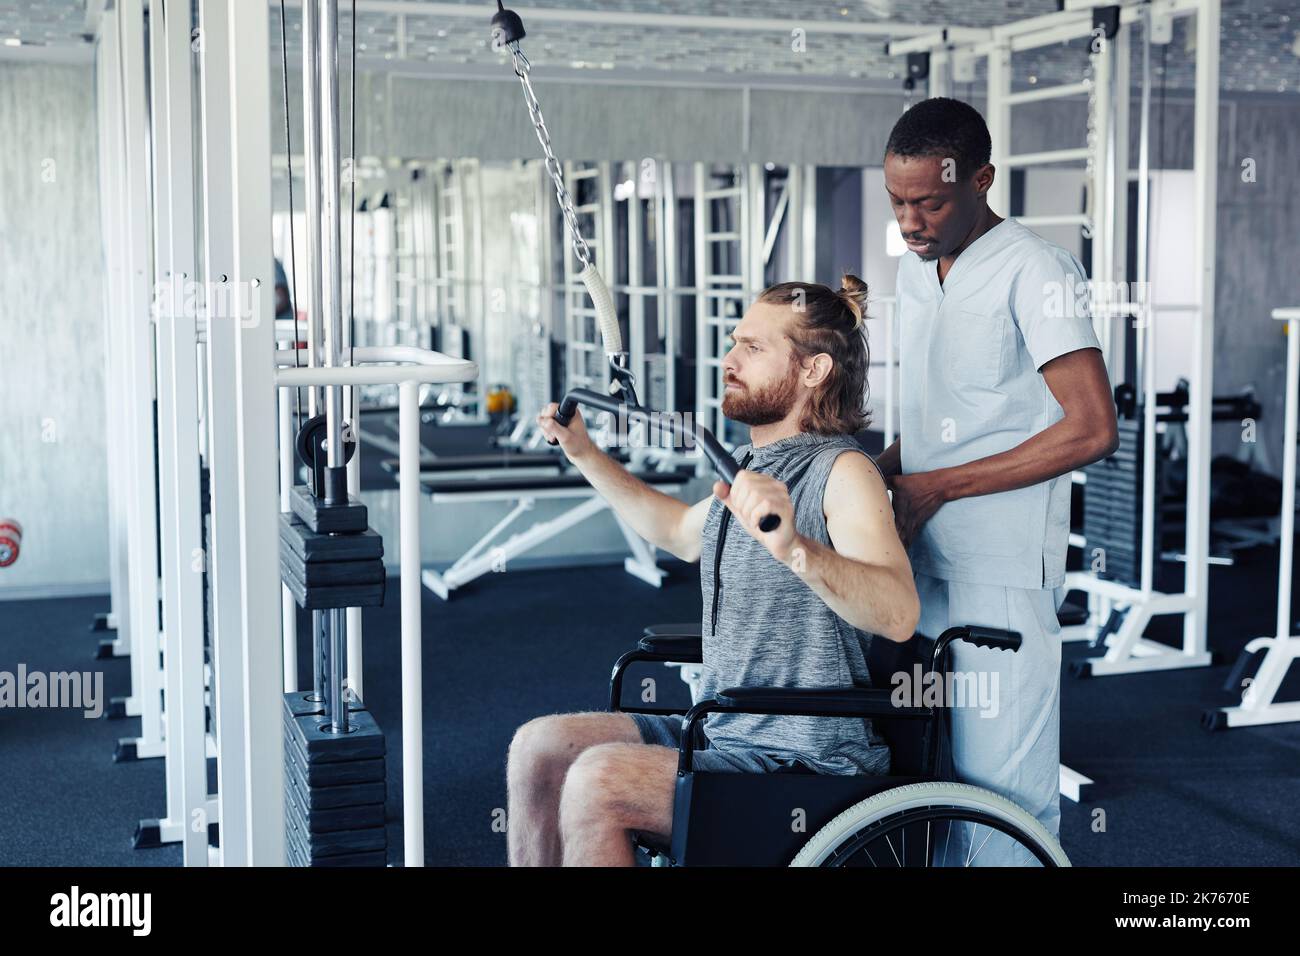 Patient with disability exercising on training equipment with therapist standing behind him and controlling his training in gym Stock Photo